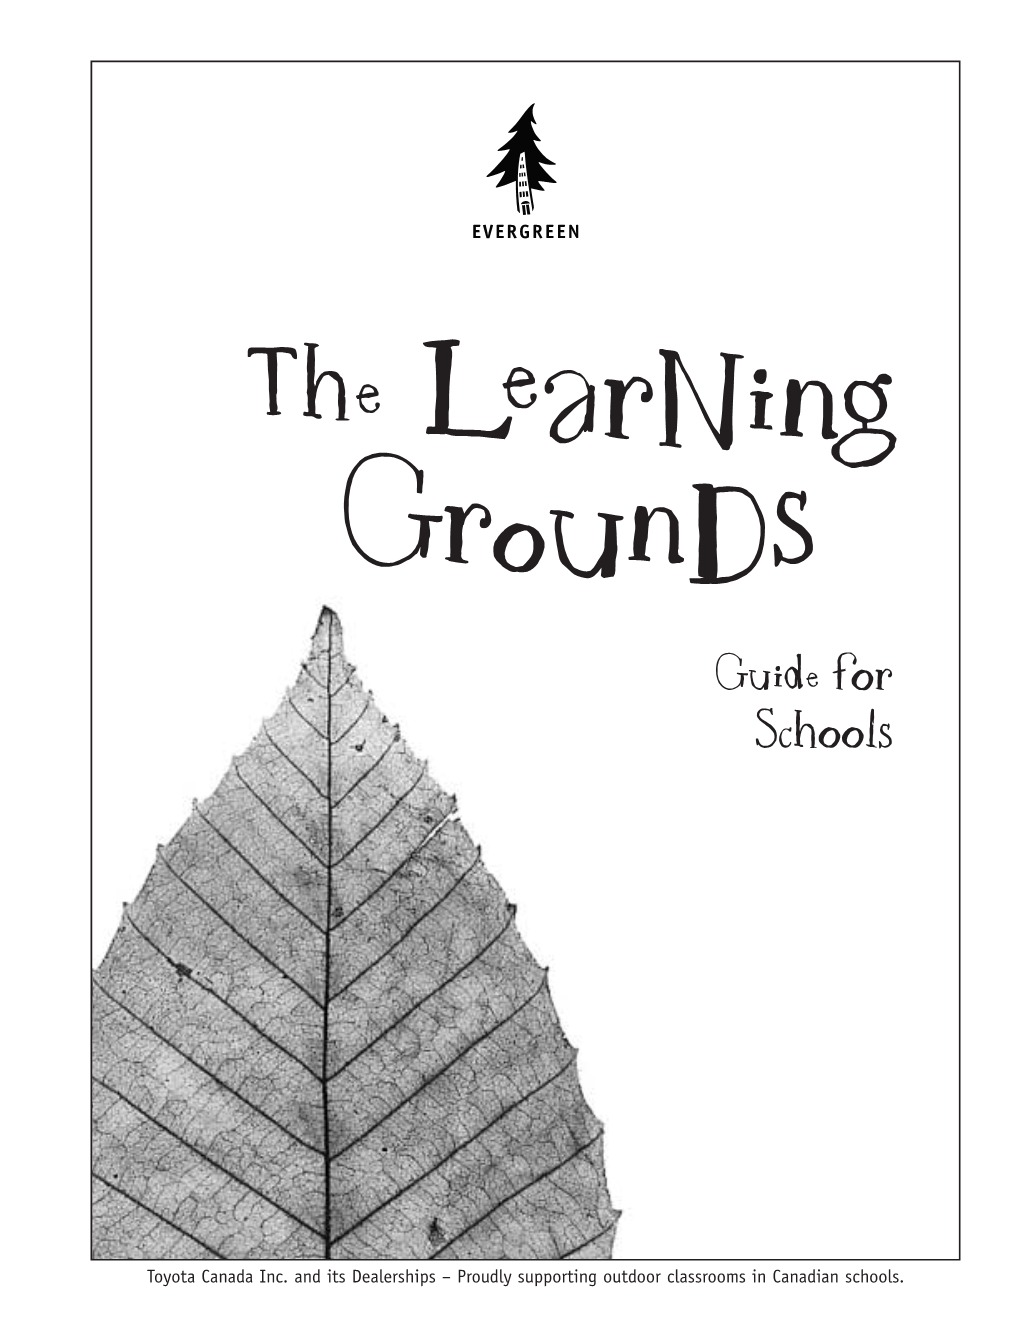 The Learning Grounds Guide for Schools